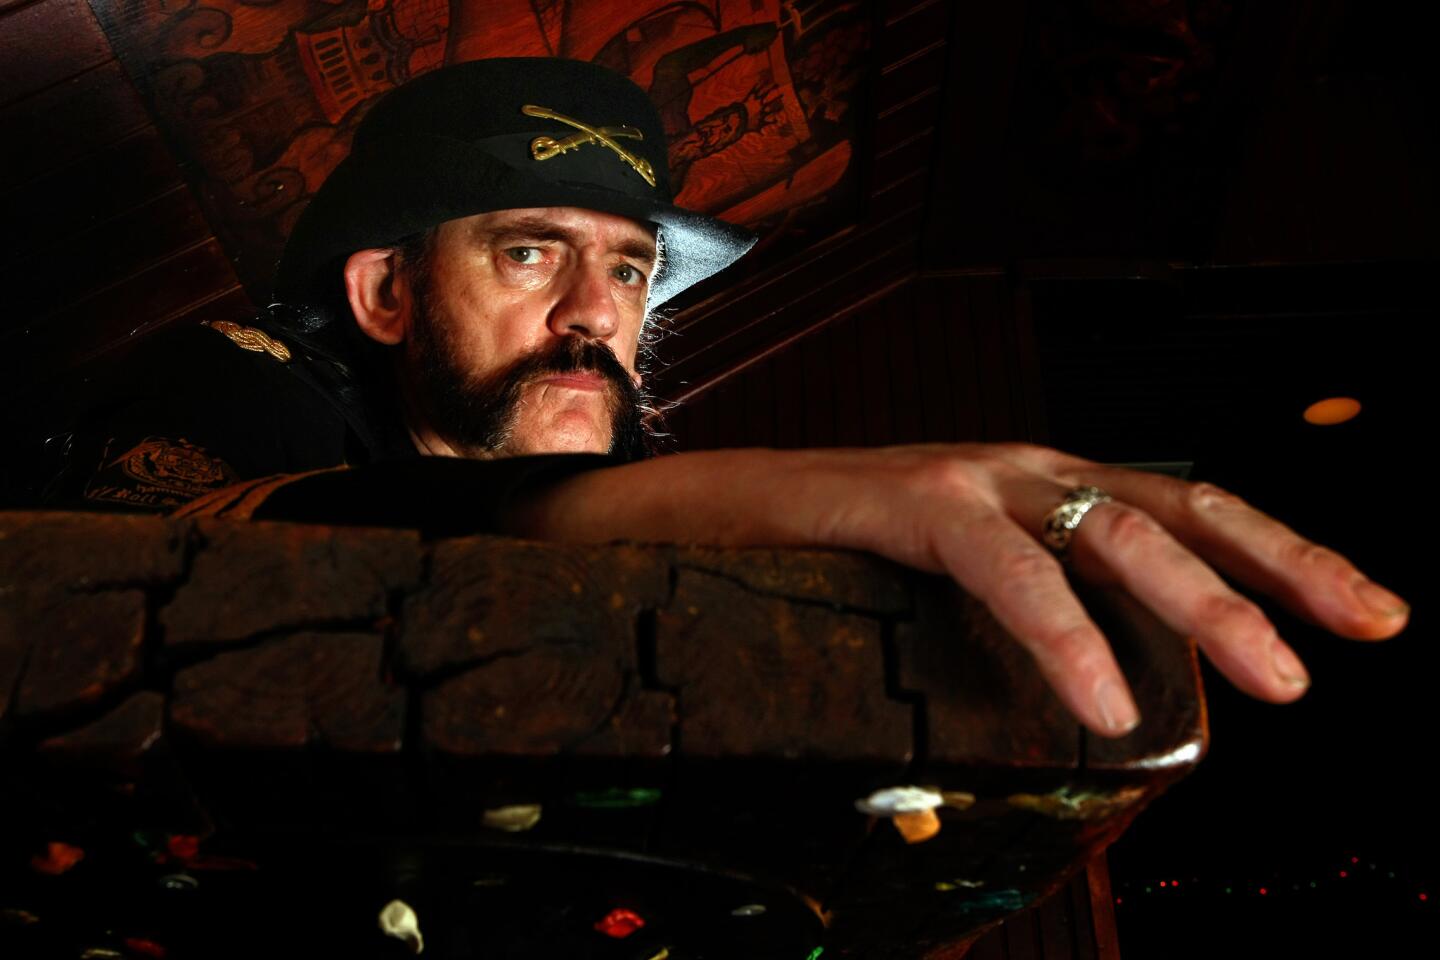 Motorhead singer, bassist and songwriter Ian "Lemmy" Kilmister, at the Rainbow Bar in West Hollywood in 2011, has died of cancer. He was 70.